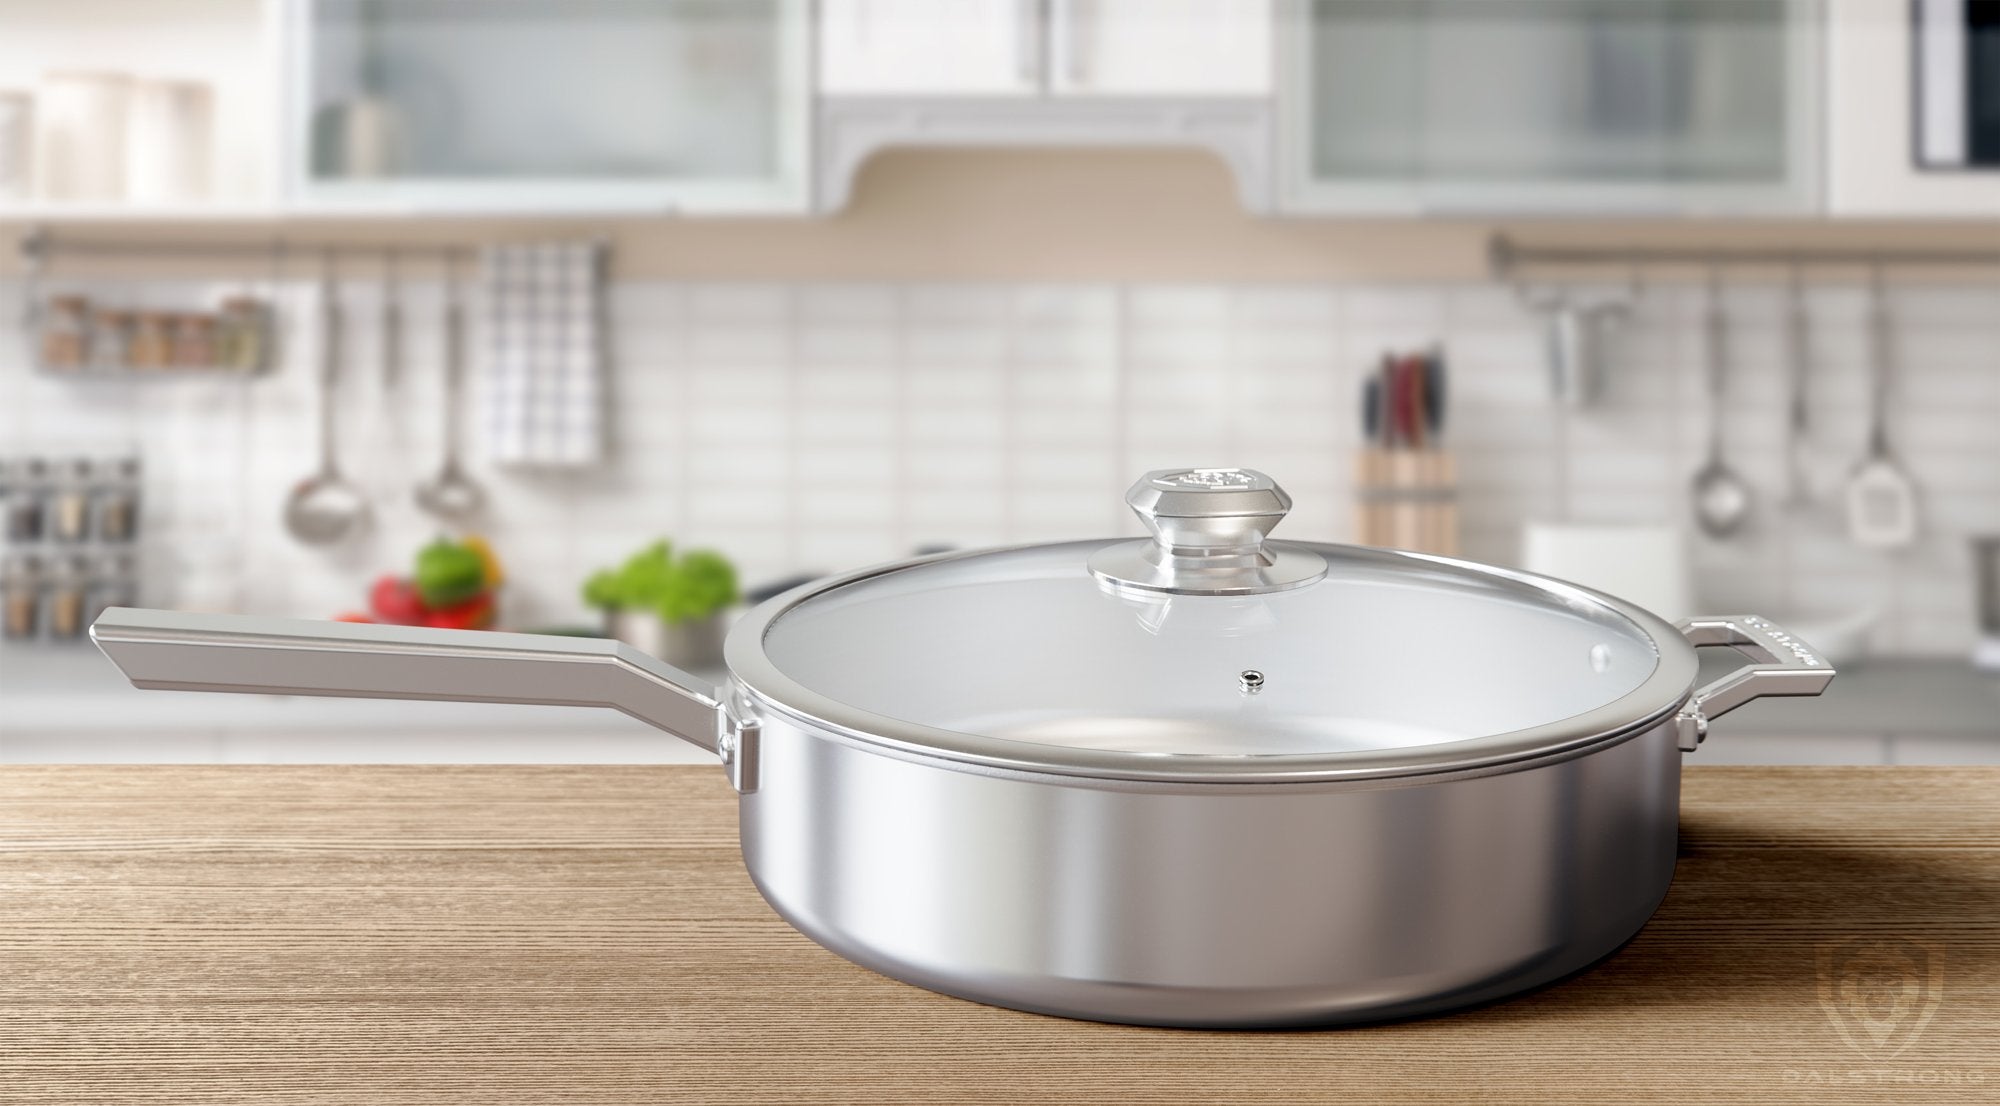 How To Season A Stainless Steel Pan Properly : 4 Simple Steps – Dalstrong